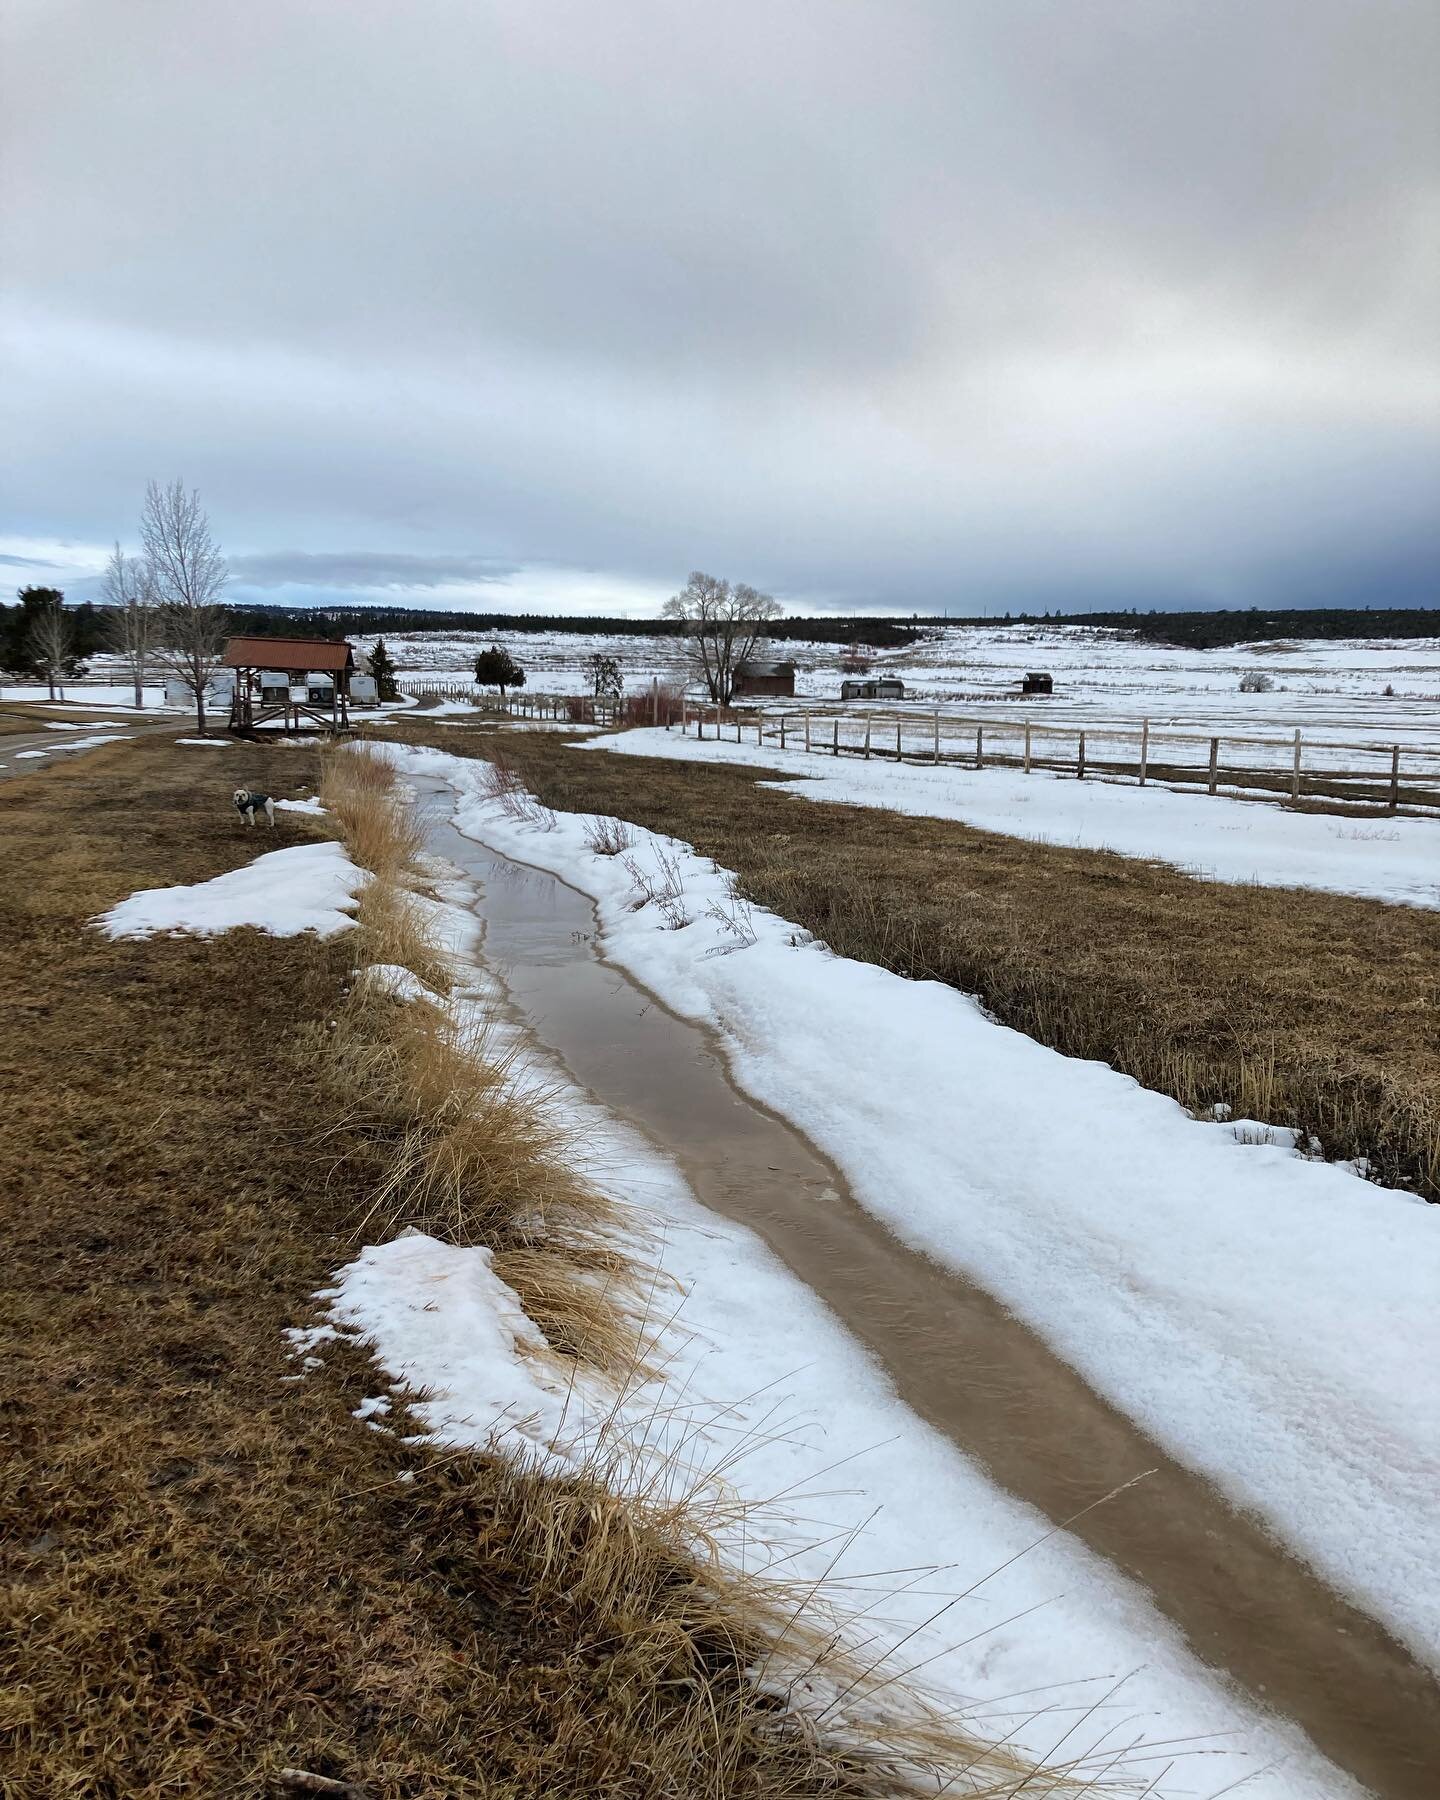 ditches are filling with snowmelt